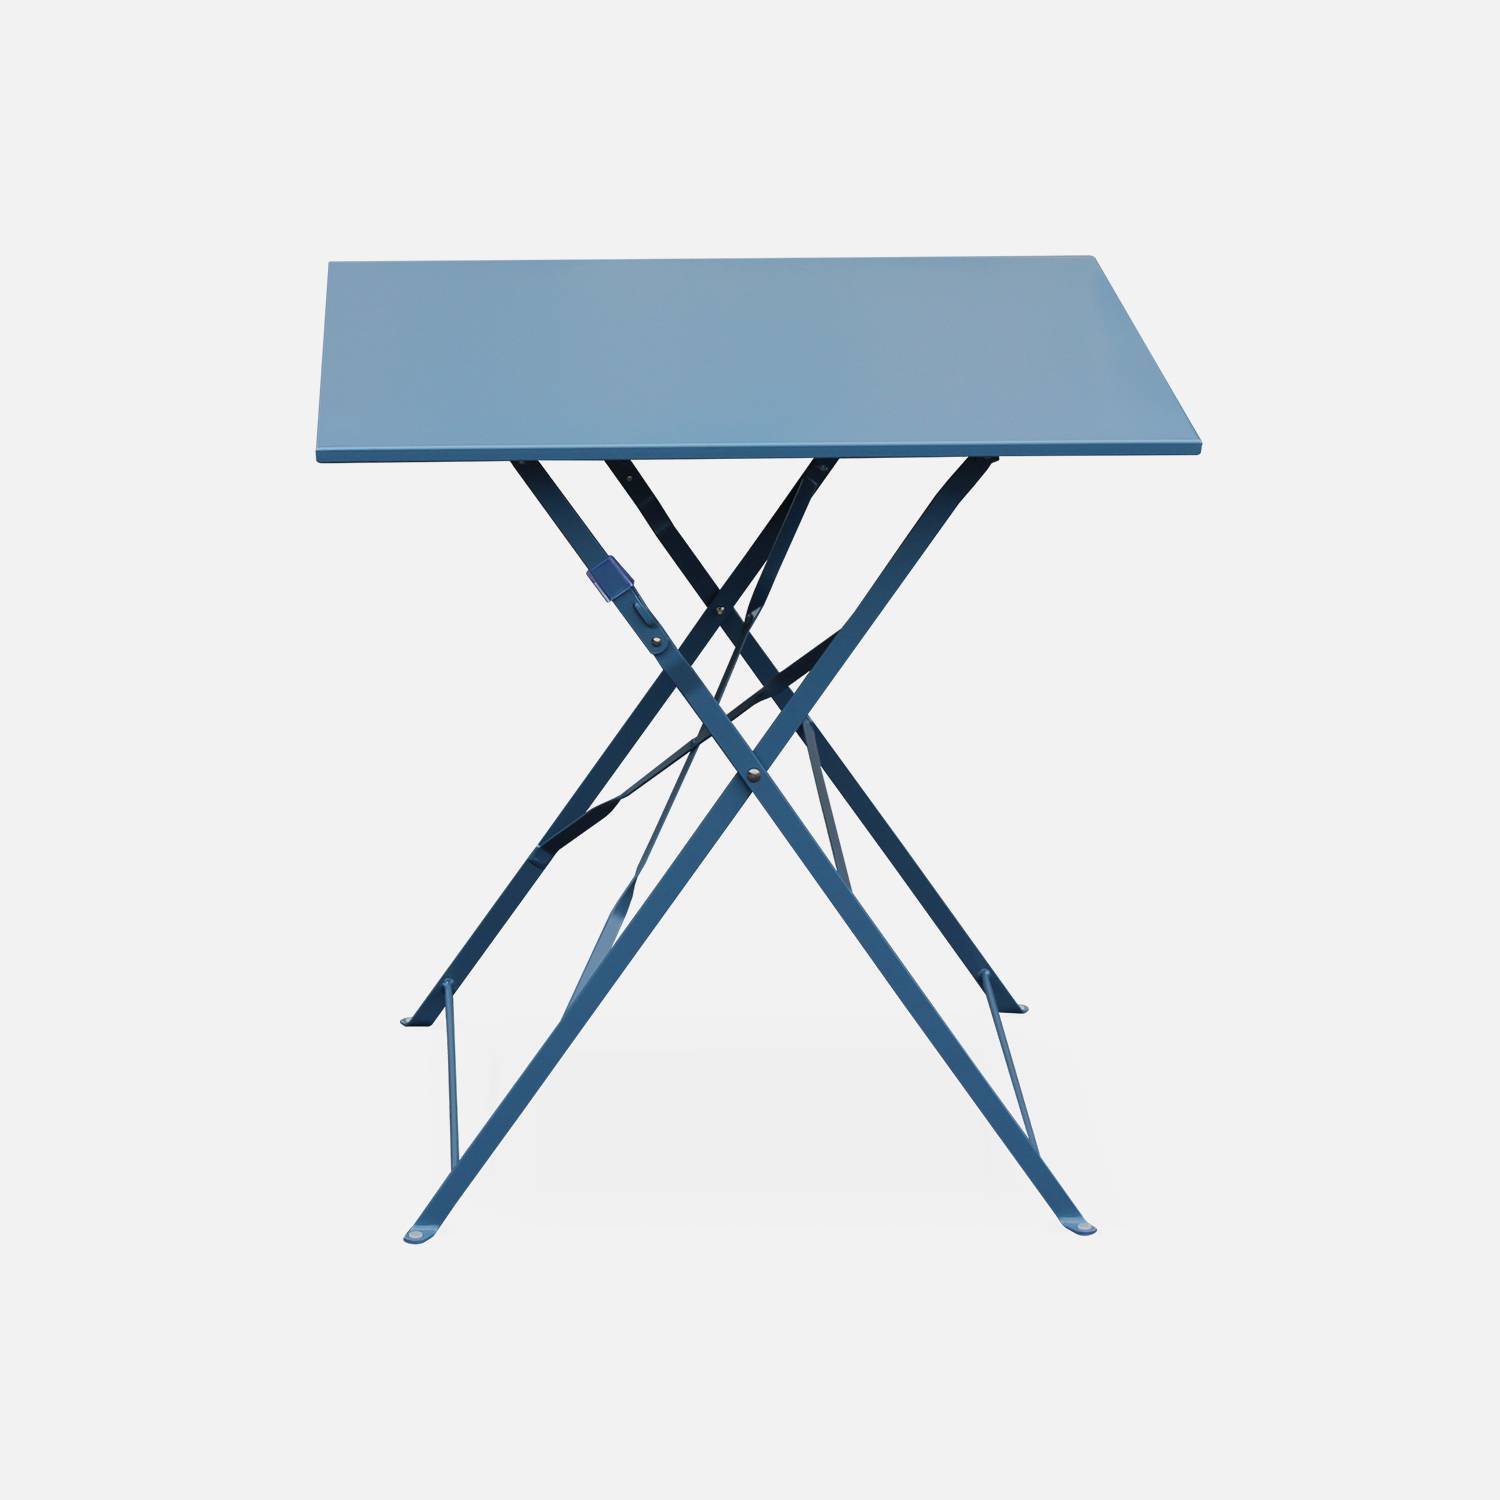 2-seater foldable thermo-lacquered steel bistro garden table with chairs, 70x70cm - Emilia - Grey Blue,sweeek,Photo3